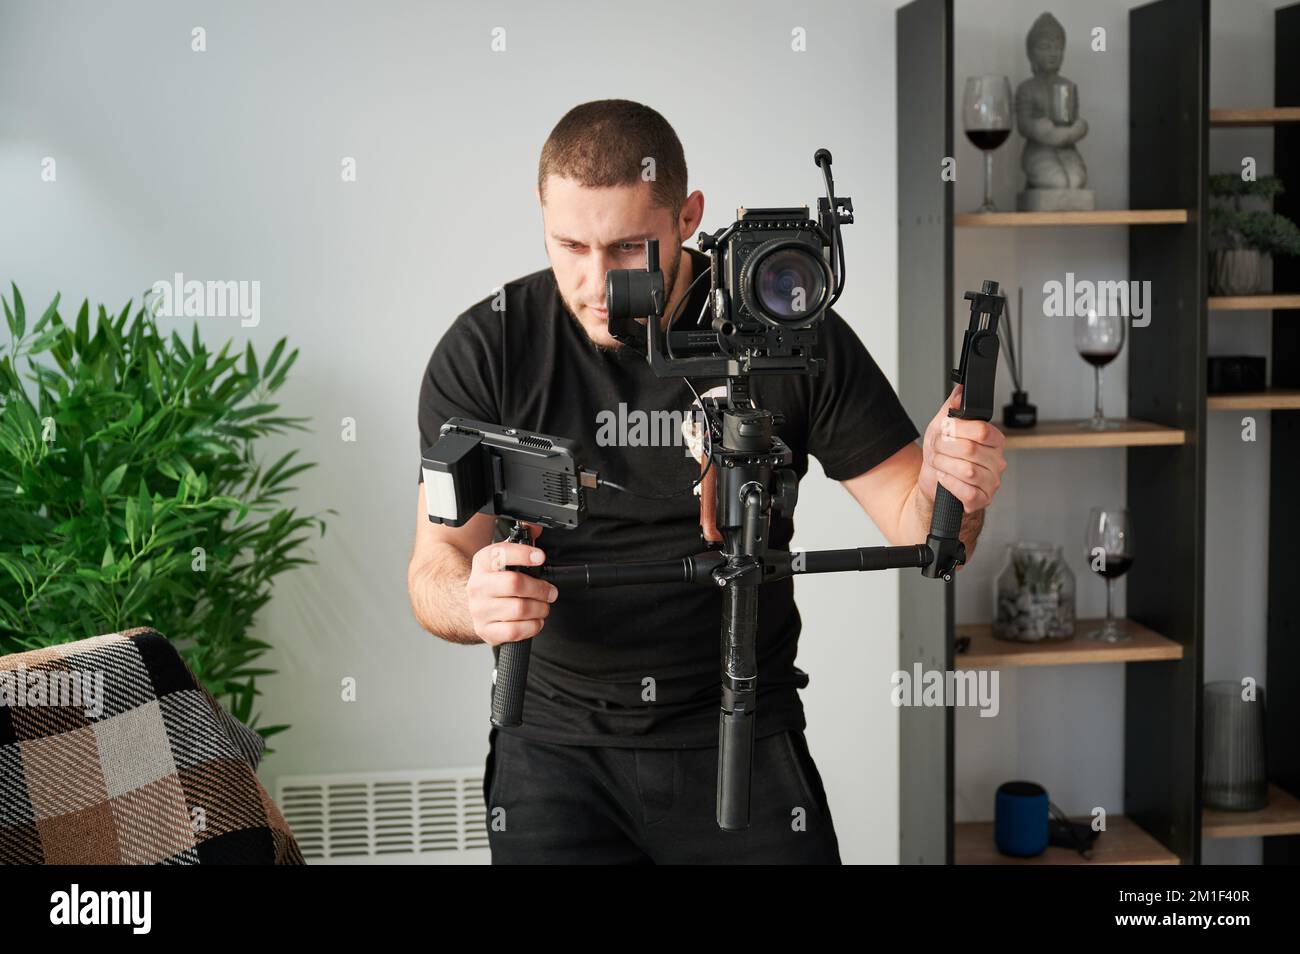 Videographer man shooting footage indoors, using camera mounted on gimbal stabilizer equipment. Stock Photo